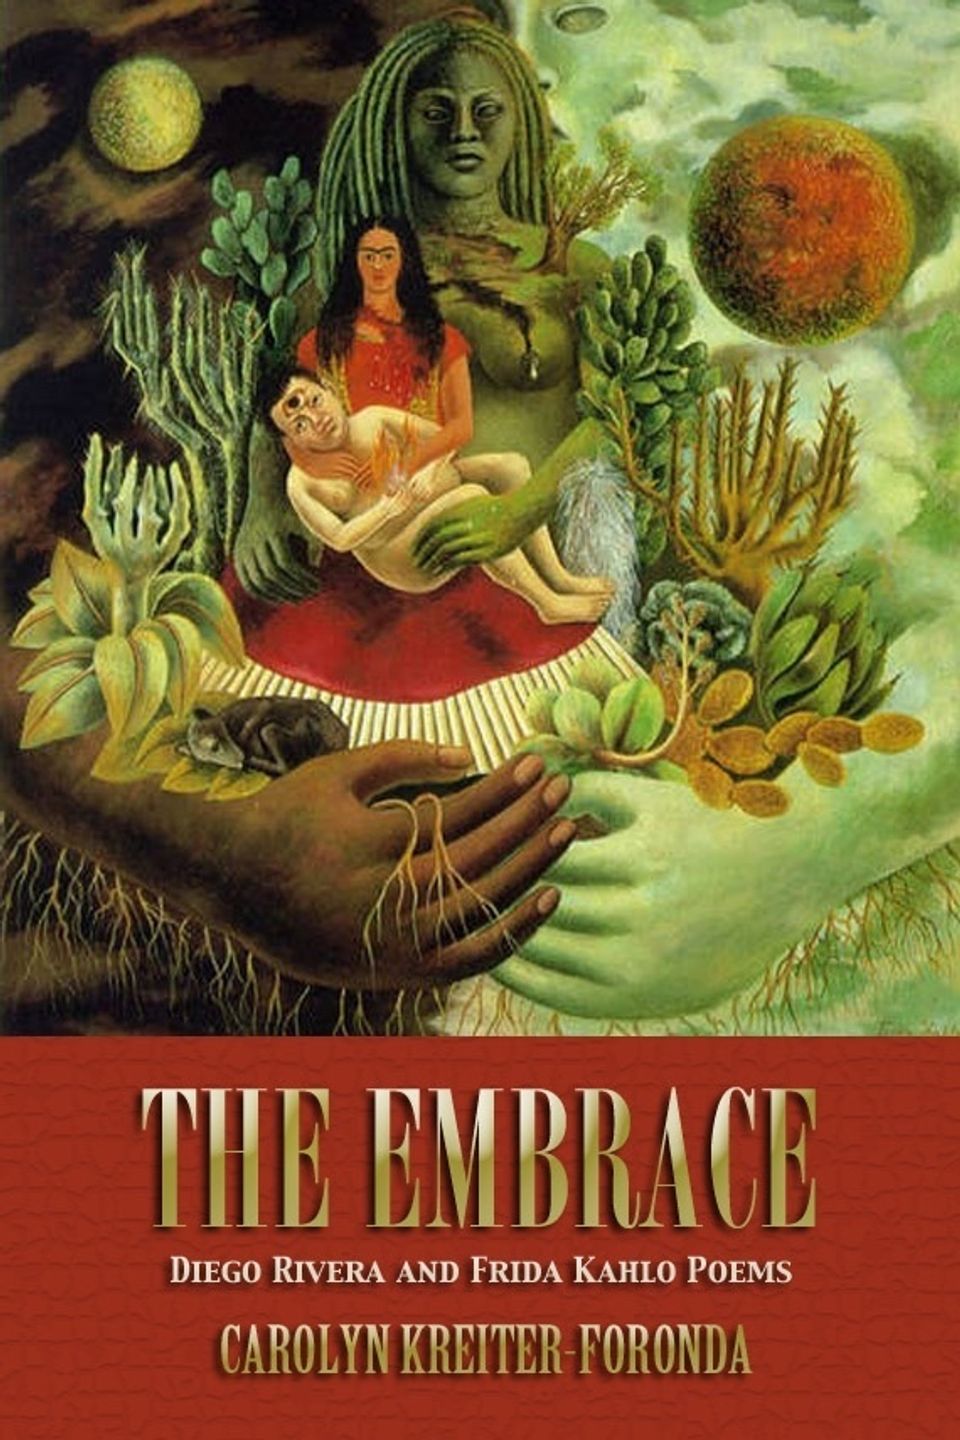 The embrace cover20160713 15578 1gn6qn4